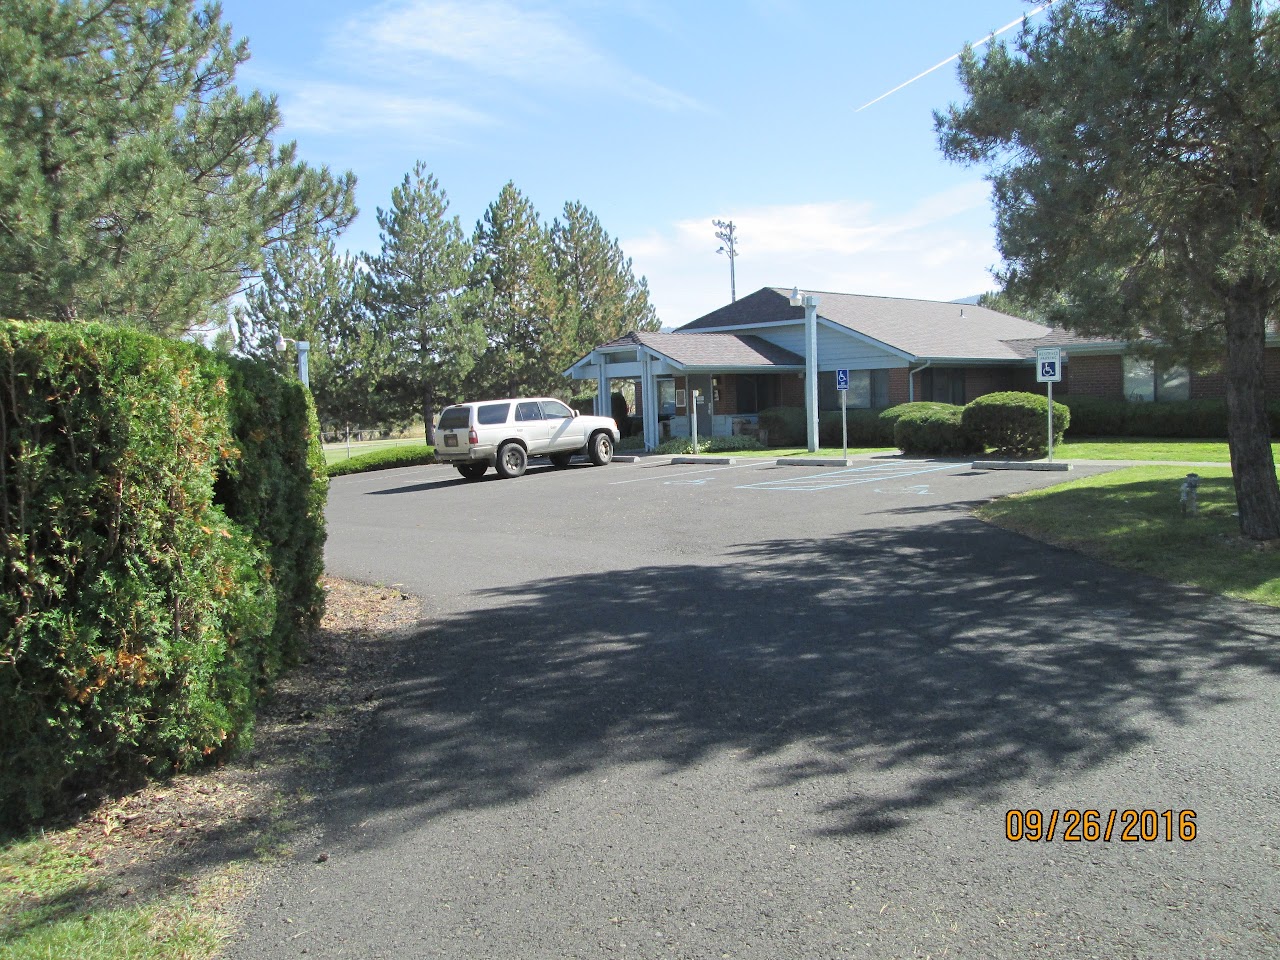 Photo of PLEASANT VALLEY APTS. Affordable housing located at 220 N MYRTLE ST GRANGEVILLE, ID 83530